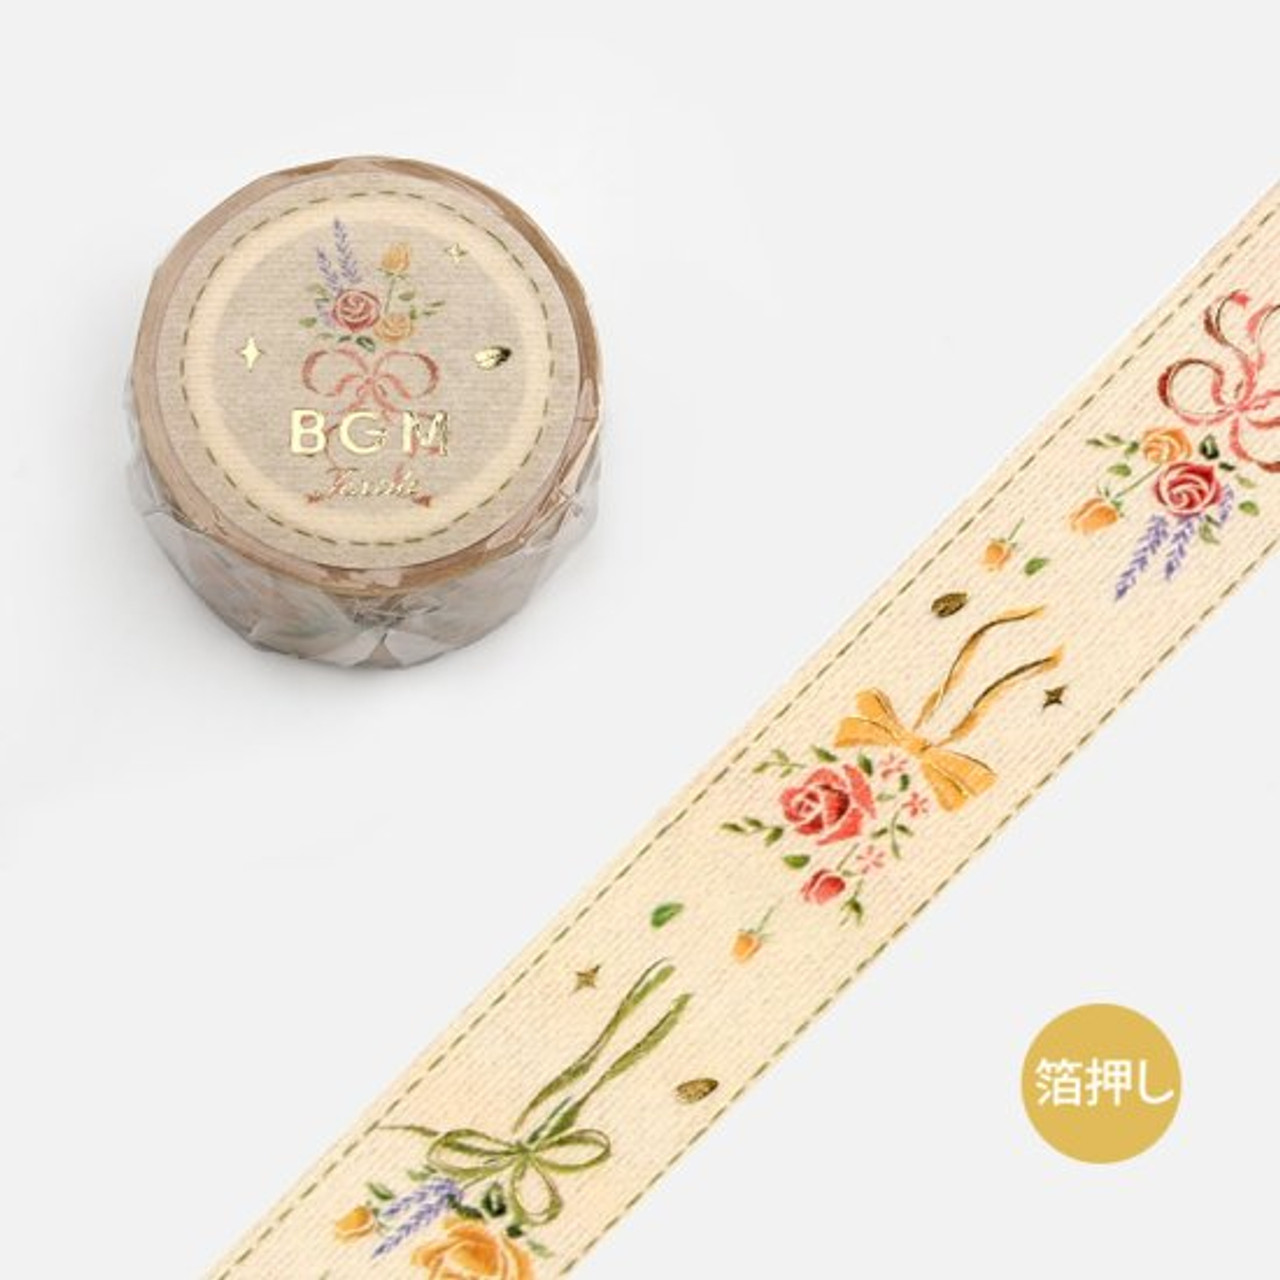 A Planning Roses Story Washi Tape Set